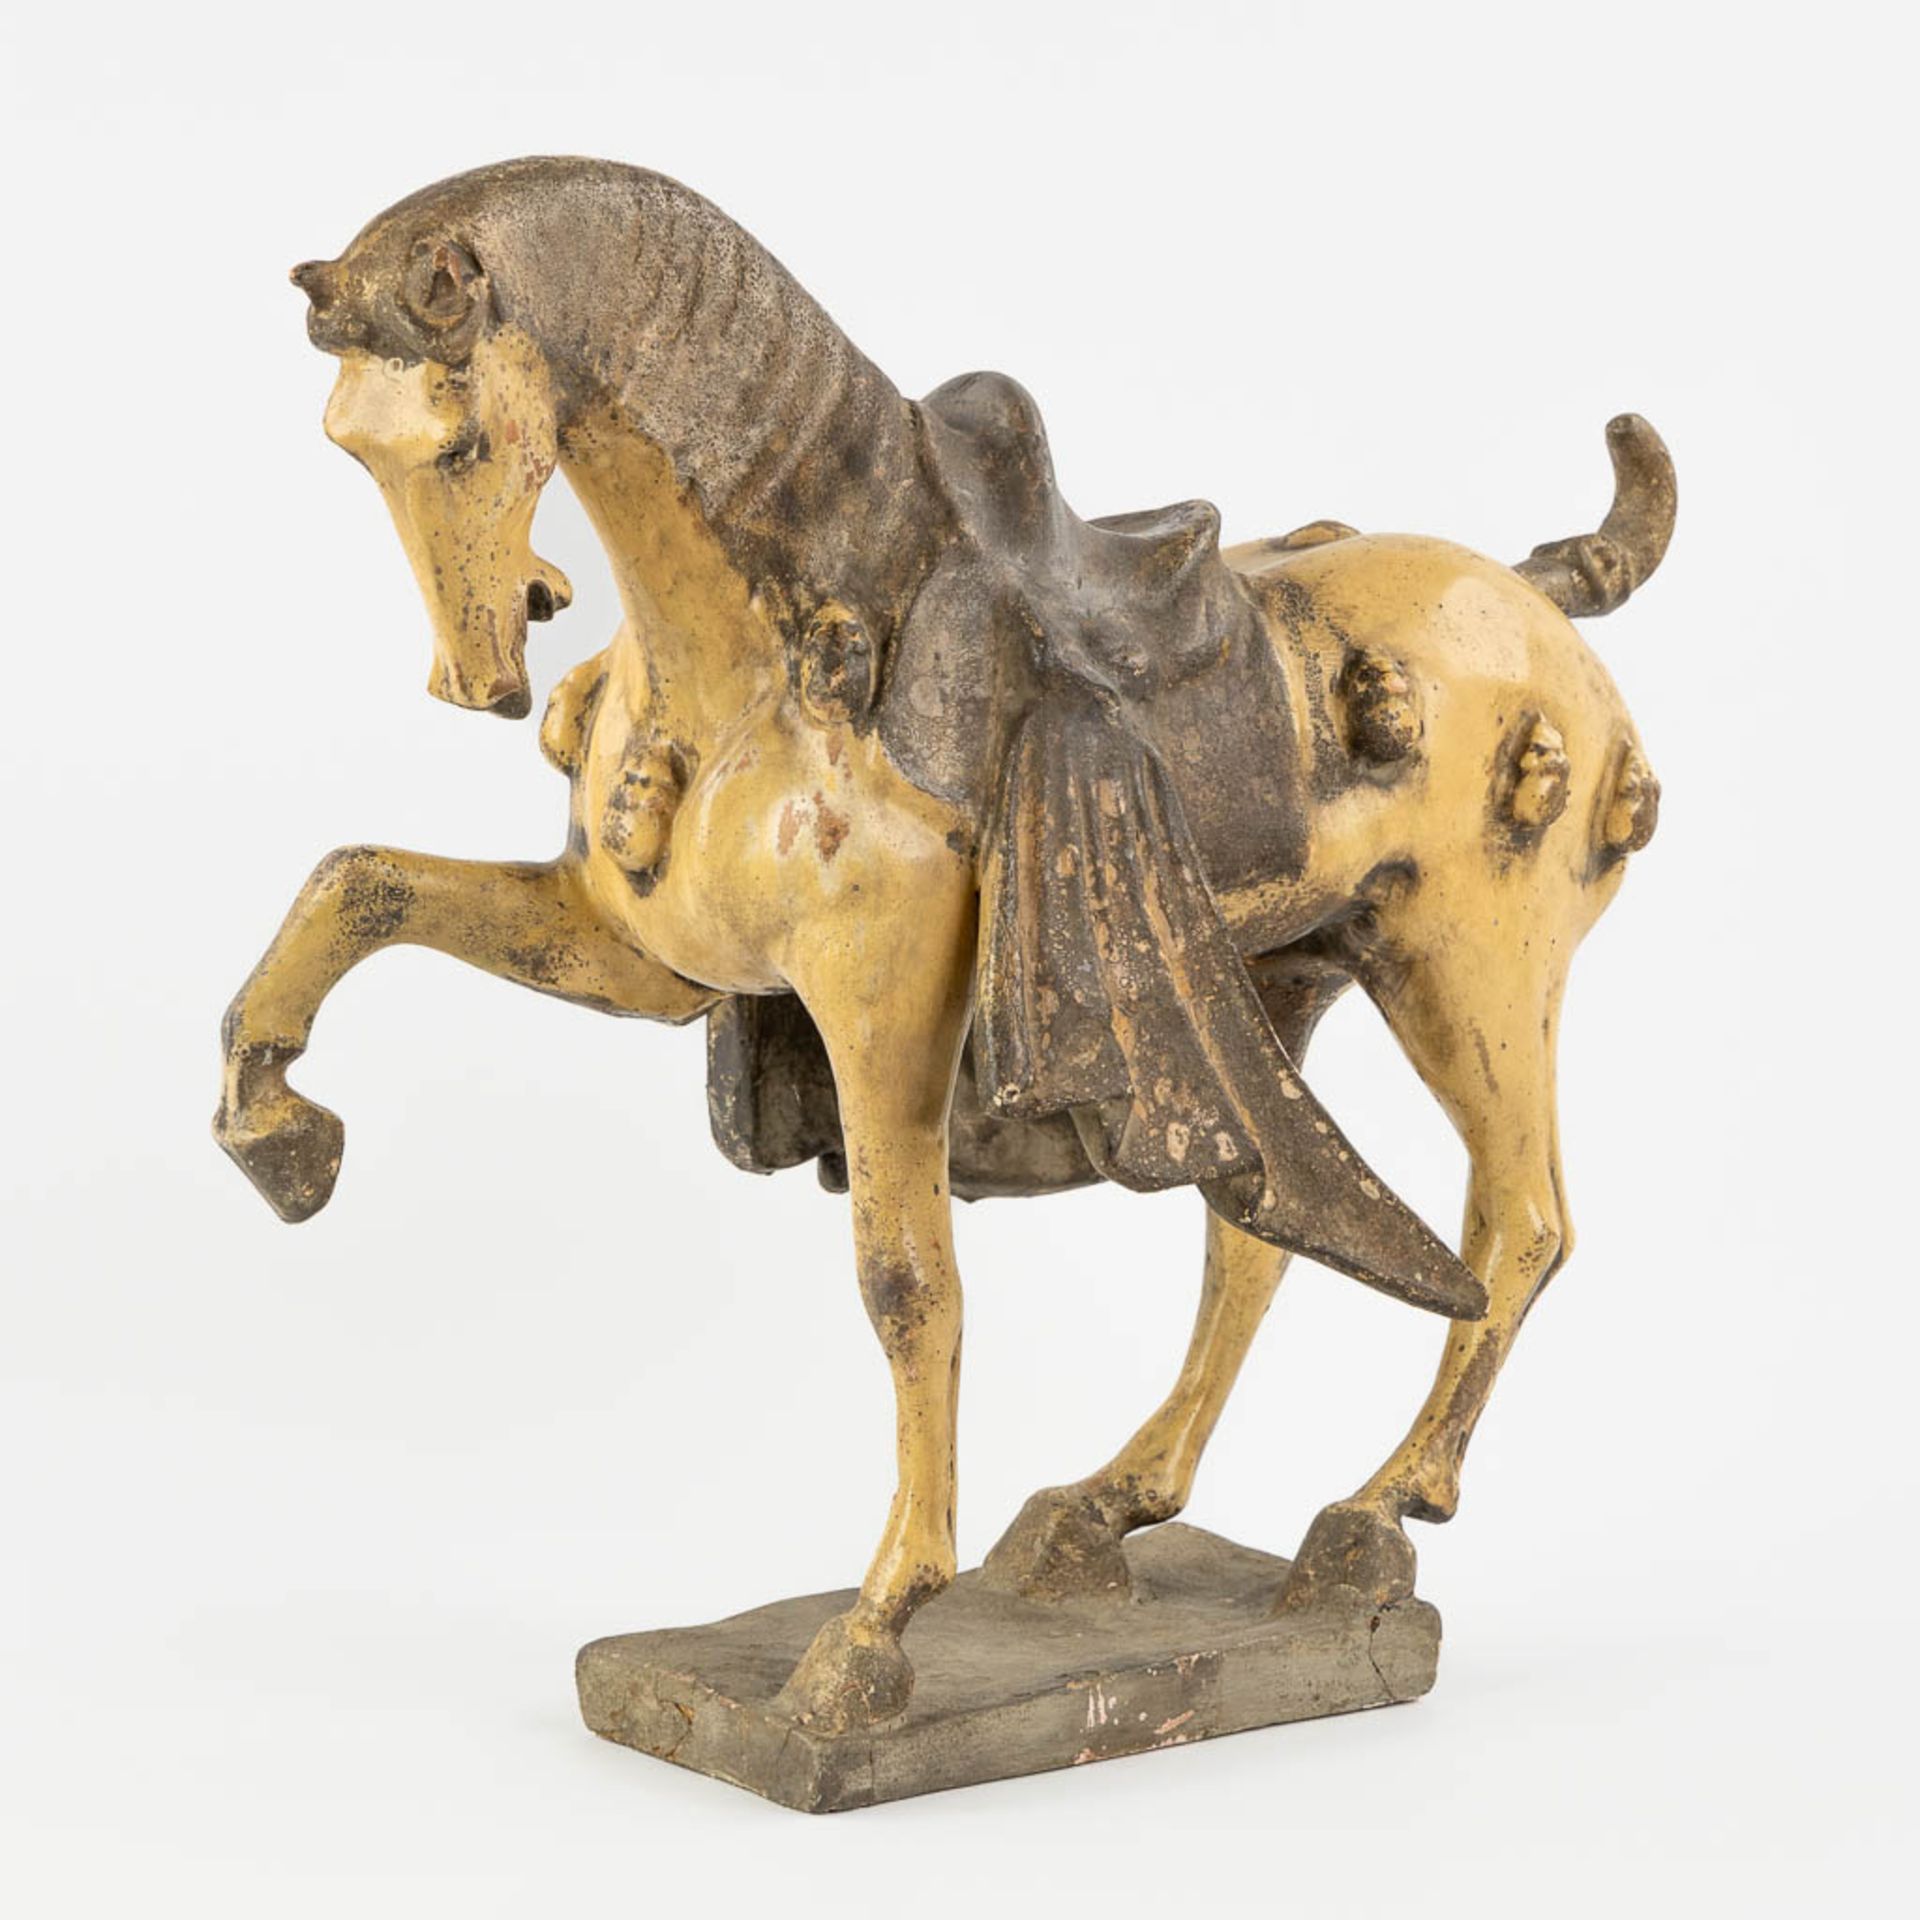 A terracotta figurine of a horse, in the style of Tang Dynasty. (L:20 x W:42 x H:42 cm)